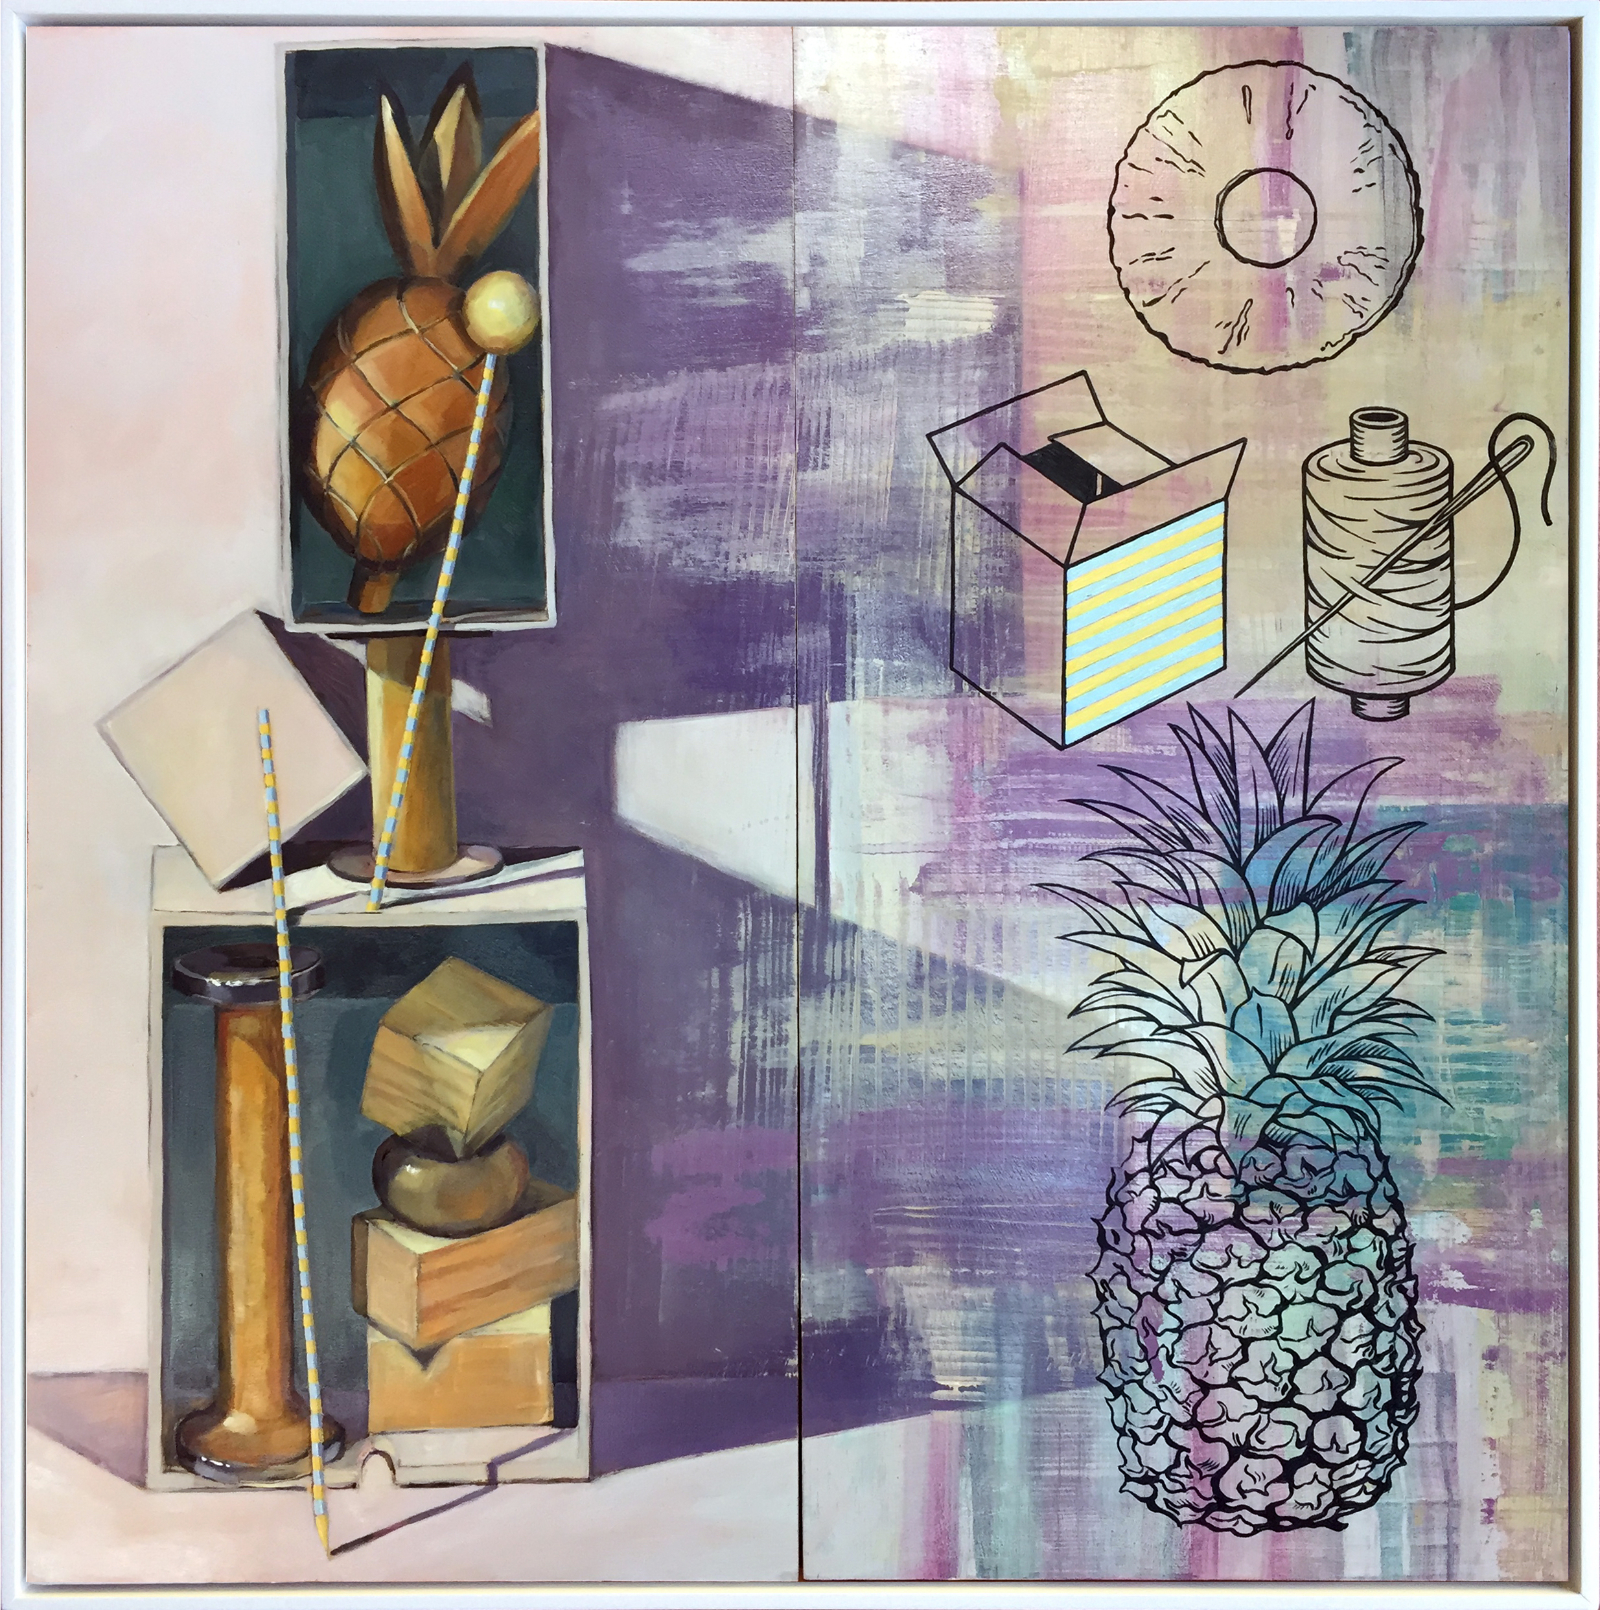 The Meaning of (Still) Life: The Wooden Pineapple by Leigh Schoenheimer | Clayton Utz Art Award 2022 Finalists | Lethbridge Gallery